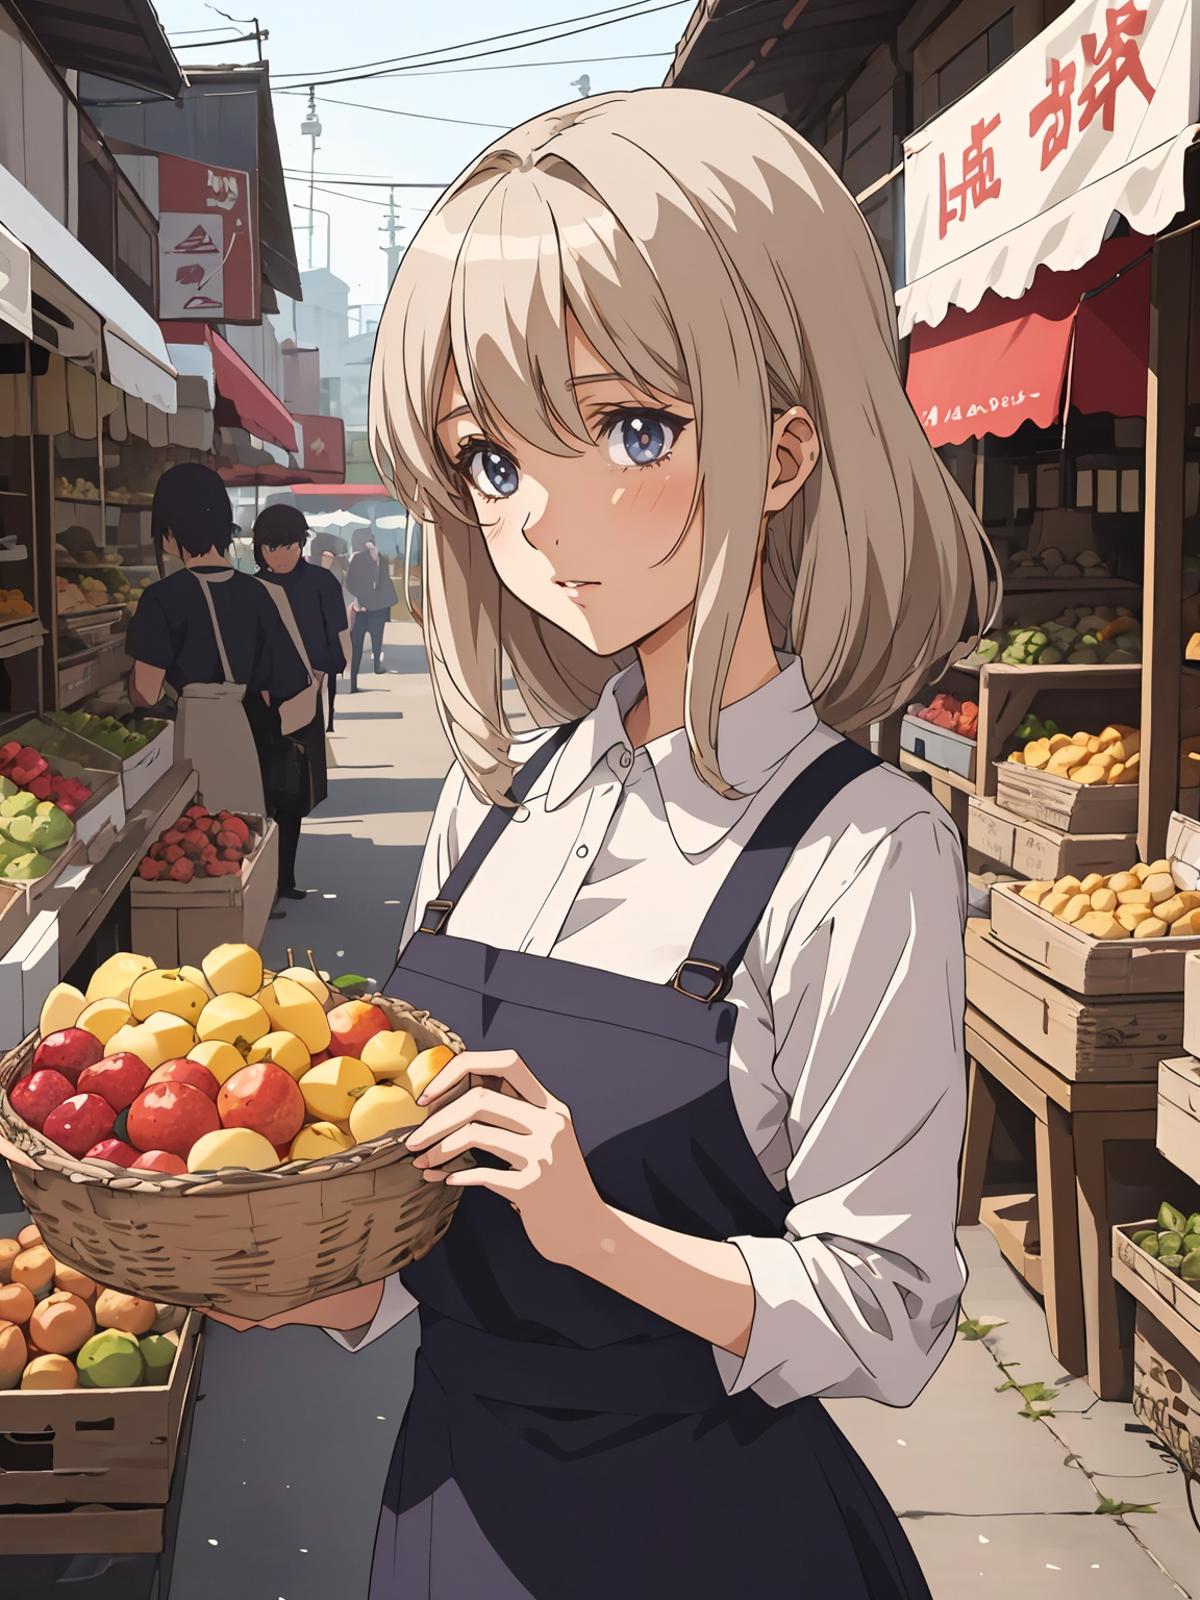 A blonde woman holding a basket of fruit.